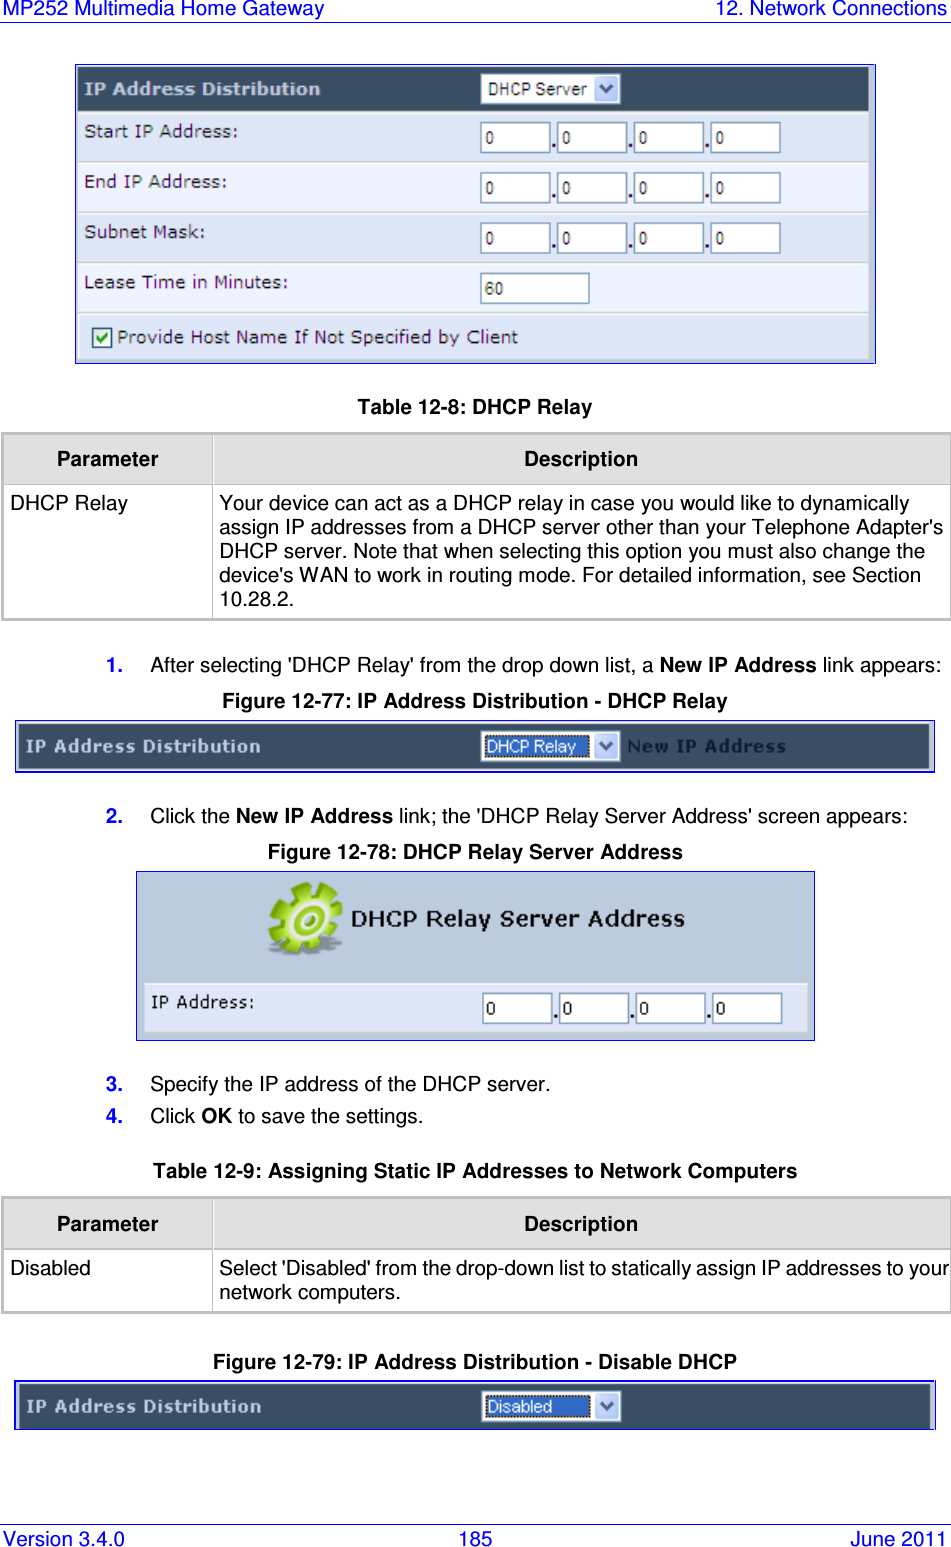 MP252 Multimedia Home Gateway  12. Network Connections Version 3.4.0  185  June 2011  Table 12-8: DHCP Relay Parameter  Description DHCP Relay Your device can act as a DHCP relay in case you would like to dynamically assign IP addresses from a DHCP server other than your Telephone Adapter&apos;s DHCP server. Note that when selecting this option you must also change the device&apos;s WAN to work in routing mode. For detailed information, see Section 10.28.2.  1.  After selecting &apos;DHCP Relay&apos; from the drop down list, a New IP Address link appears: Figure 12-77: IP Address Distribution - DHCP Relay  2.  Click the New IP Address link; the &apos;DHCP Relay Server Address&apos; screen appears: Figure 12-78: DHCP Relay Server Address  3.  Specify the IP address of the DHCP server. 4.  Click OK to save the settings. Table 12-9: Assigning Static IP Addresses to Network Computers Parameter  Description Disabled Select &apos;Disabled&apos; from the drop-down list to statically assign IP addresses to your network computers.  Figure 12-79: IP Address Distribution - Disable DHCP   